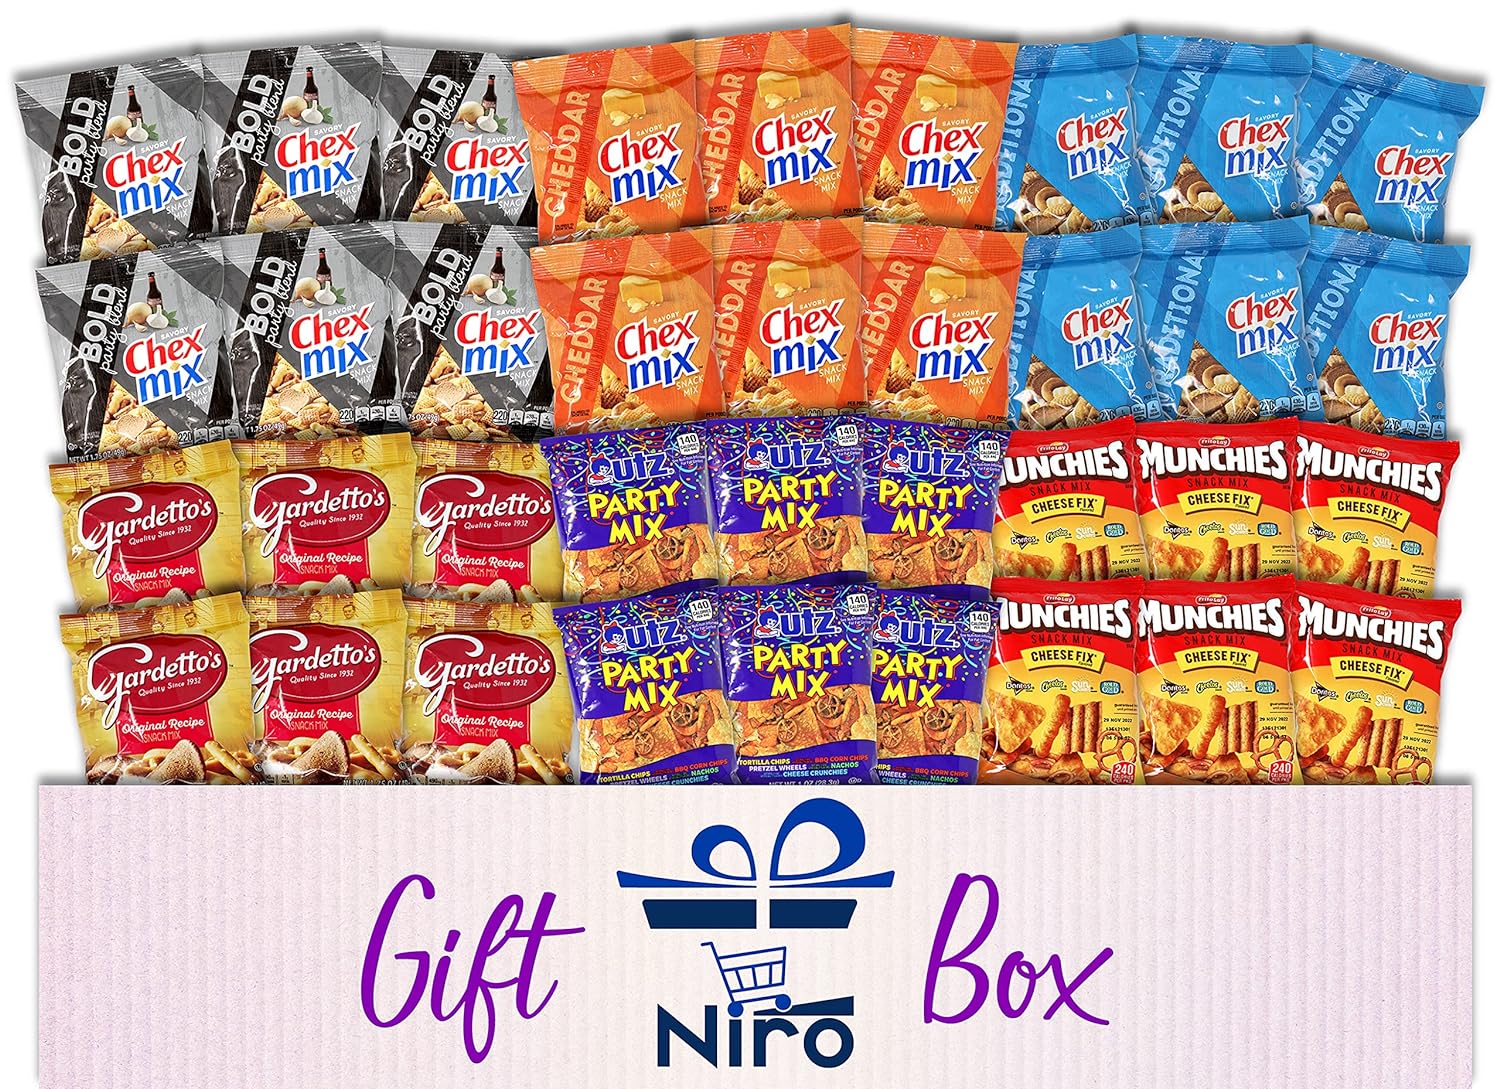 Niro Assortment | Flavored Snack Mix & Party Mix Variety Pack, Low Calorie Snack Mix | Gardetto's, Utz, Munchies, and Chex Mix | Individual Packs | 36 Packs